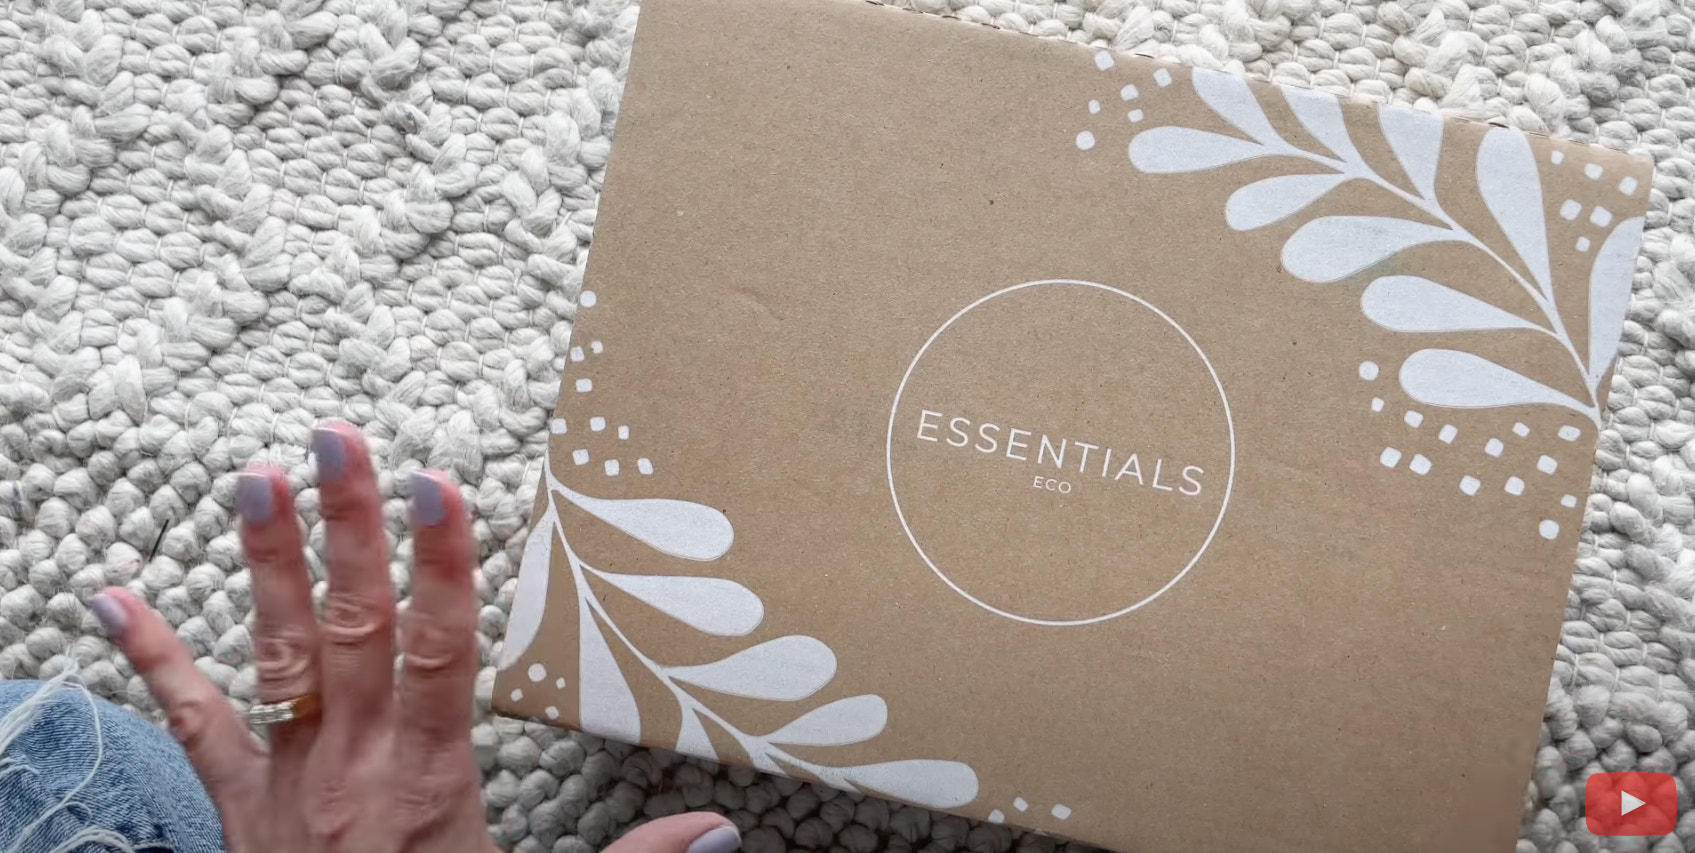 17 Proven Tips For A Great Unboxing Video in 2021